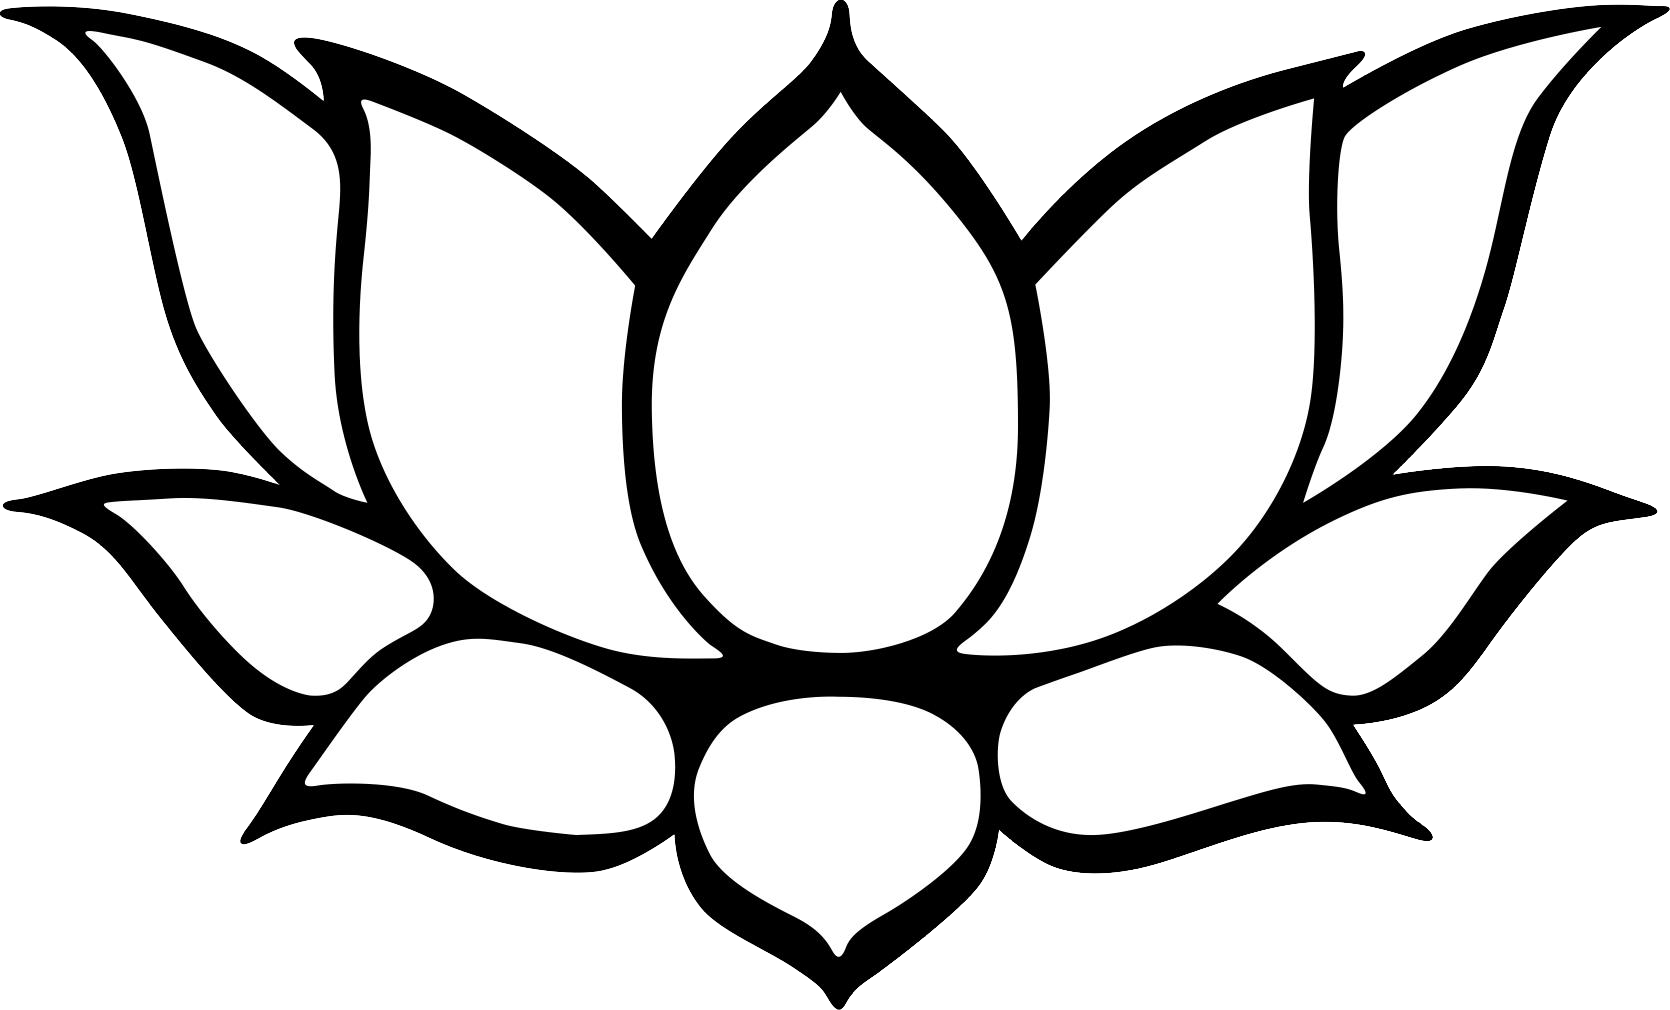 Lotus flower clipart black and white